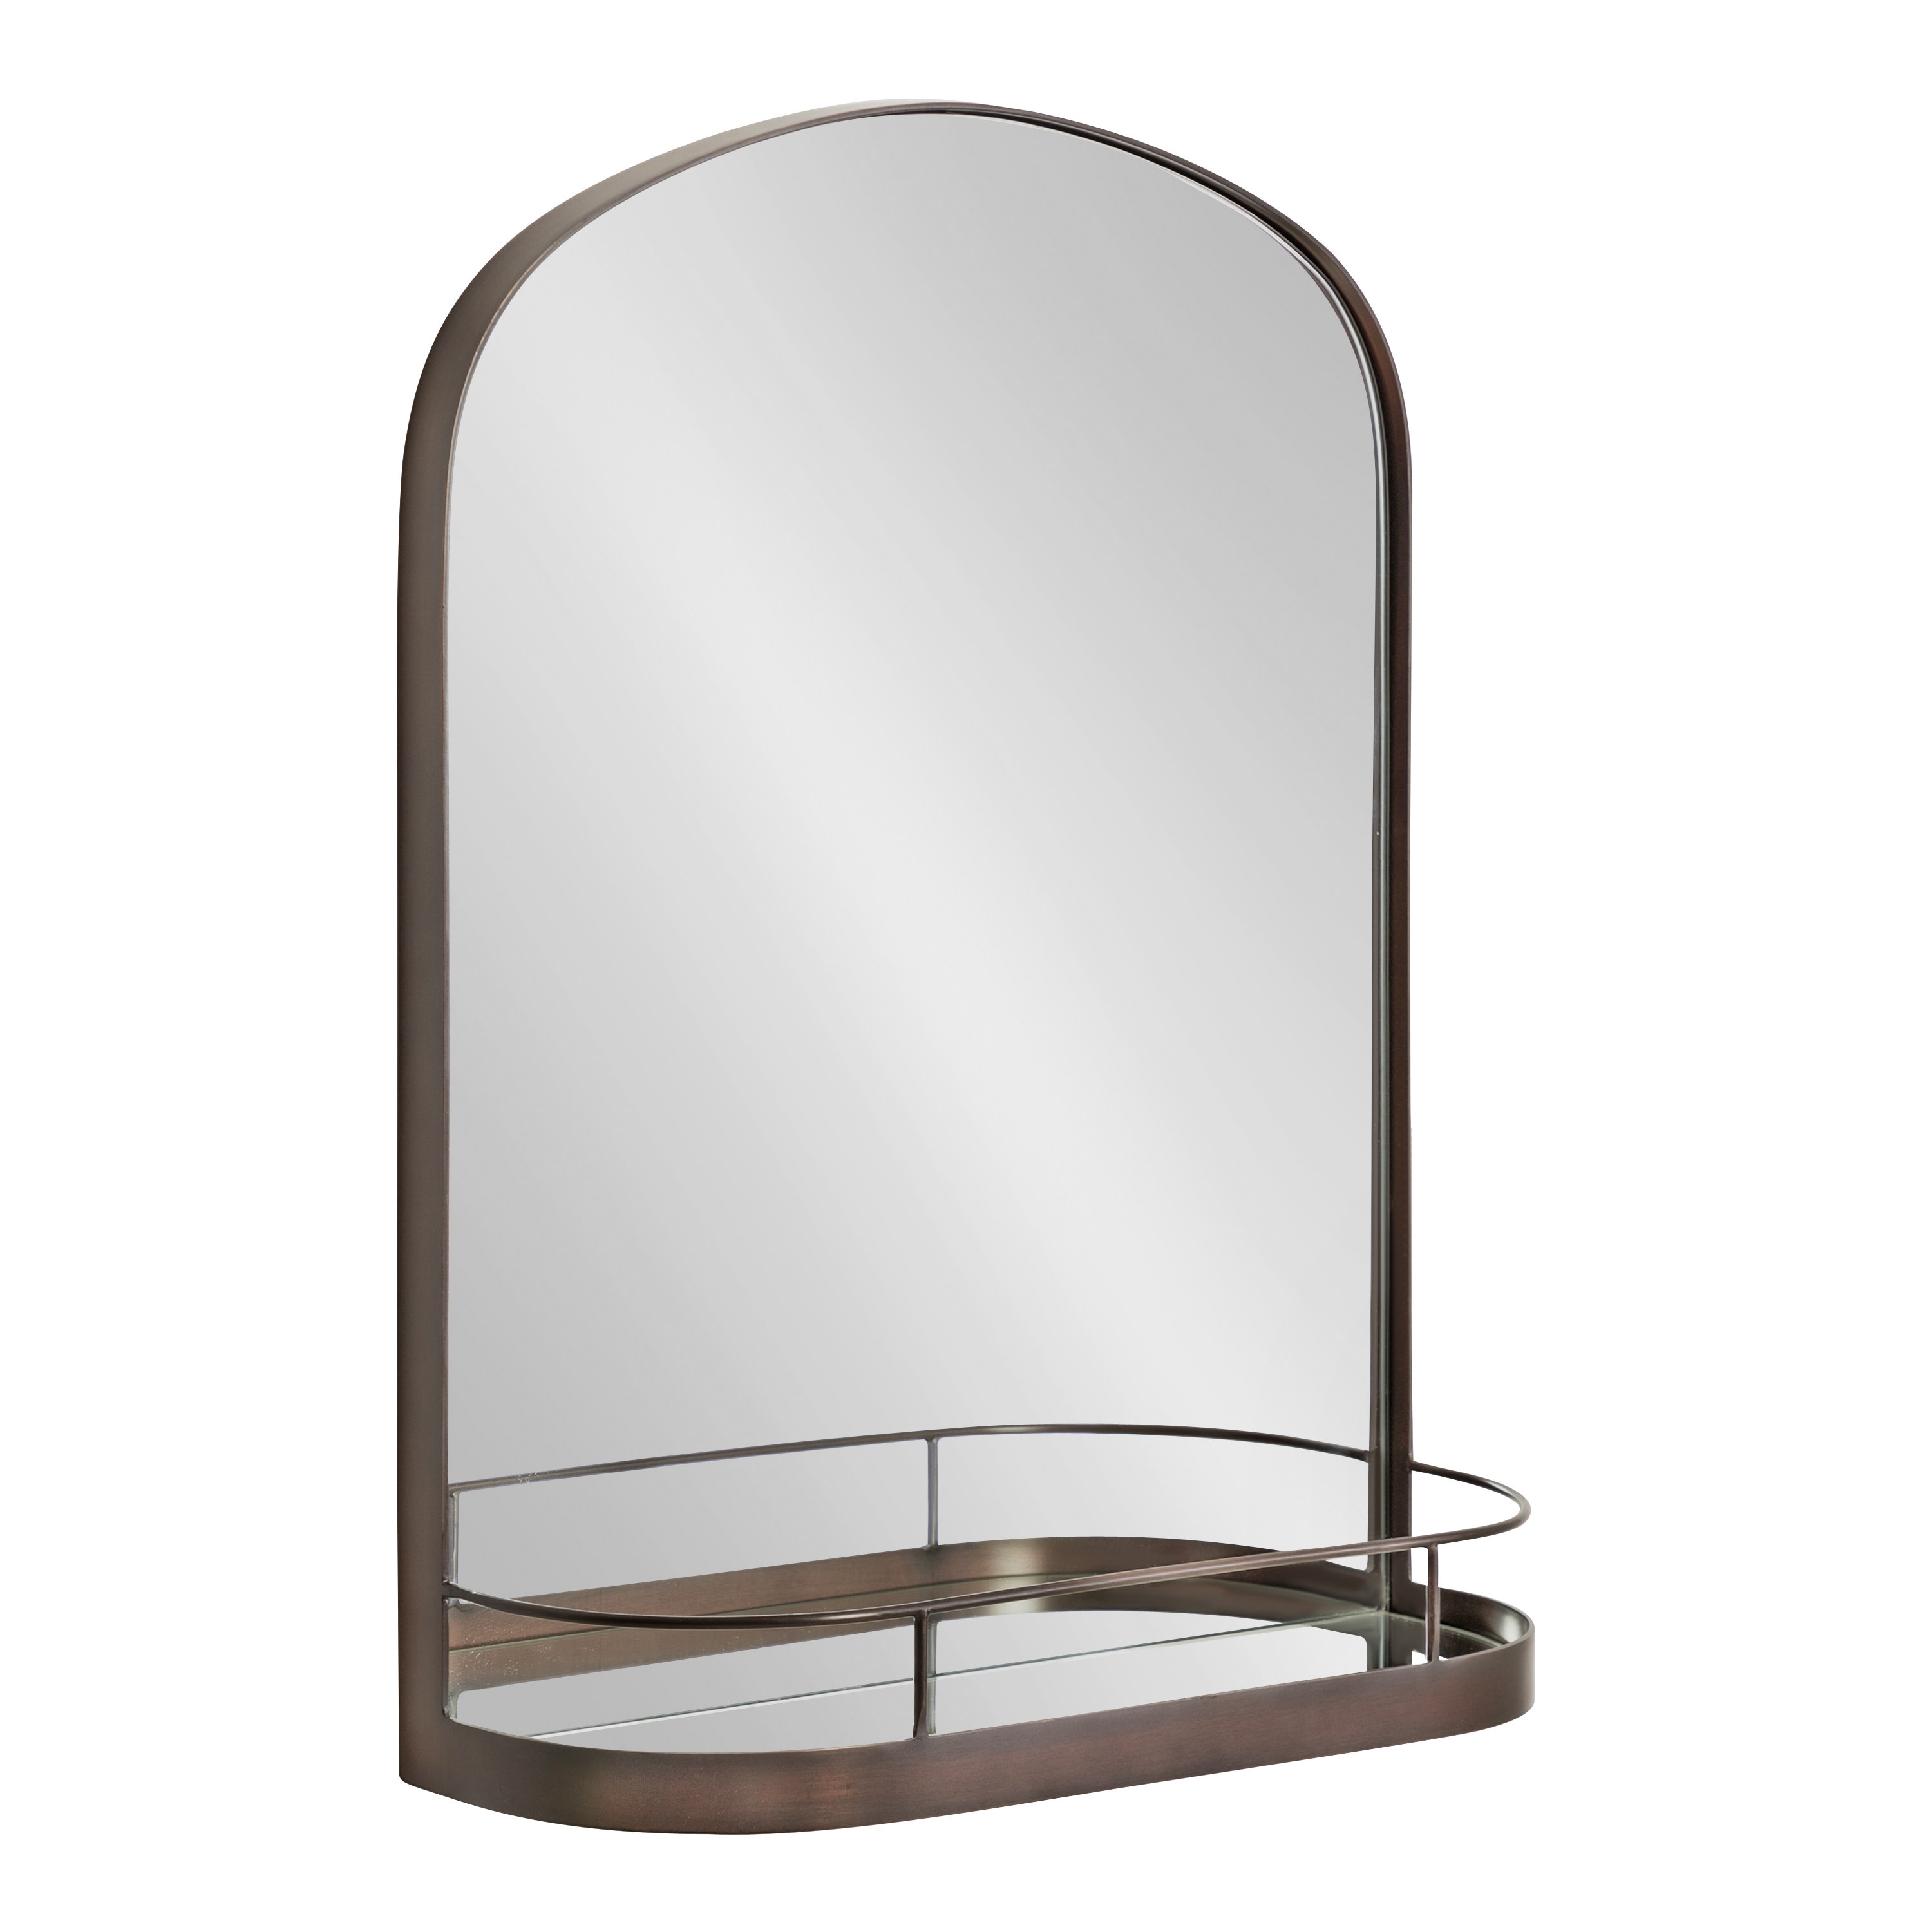 Kate and Laurel Peyson Framed Arch Mirror with Shelf On Sale Bed Bath   Beyond 32834665